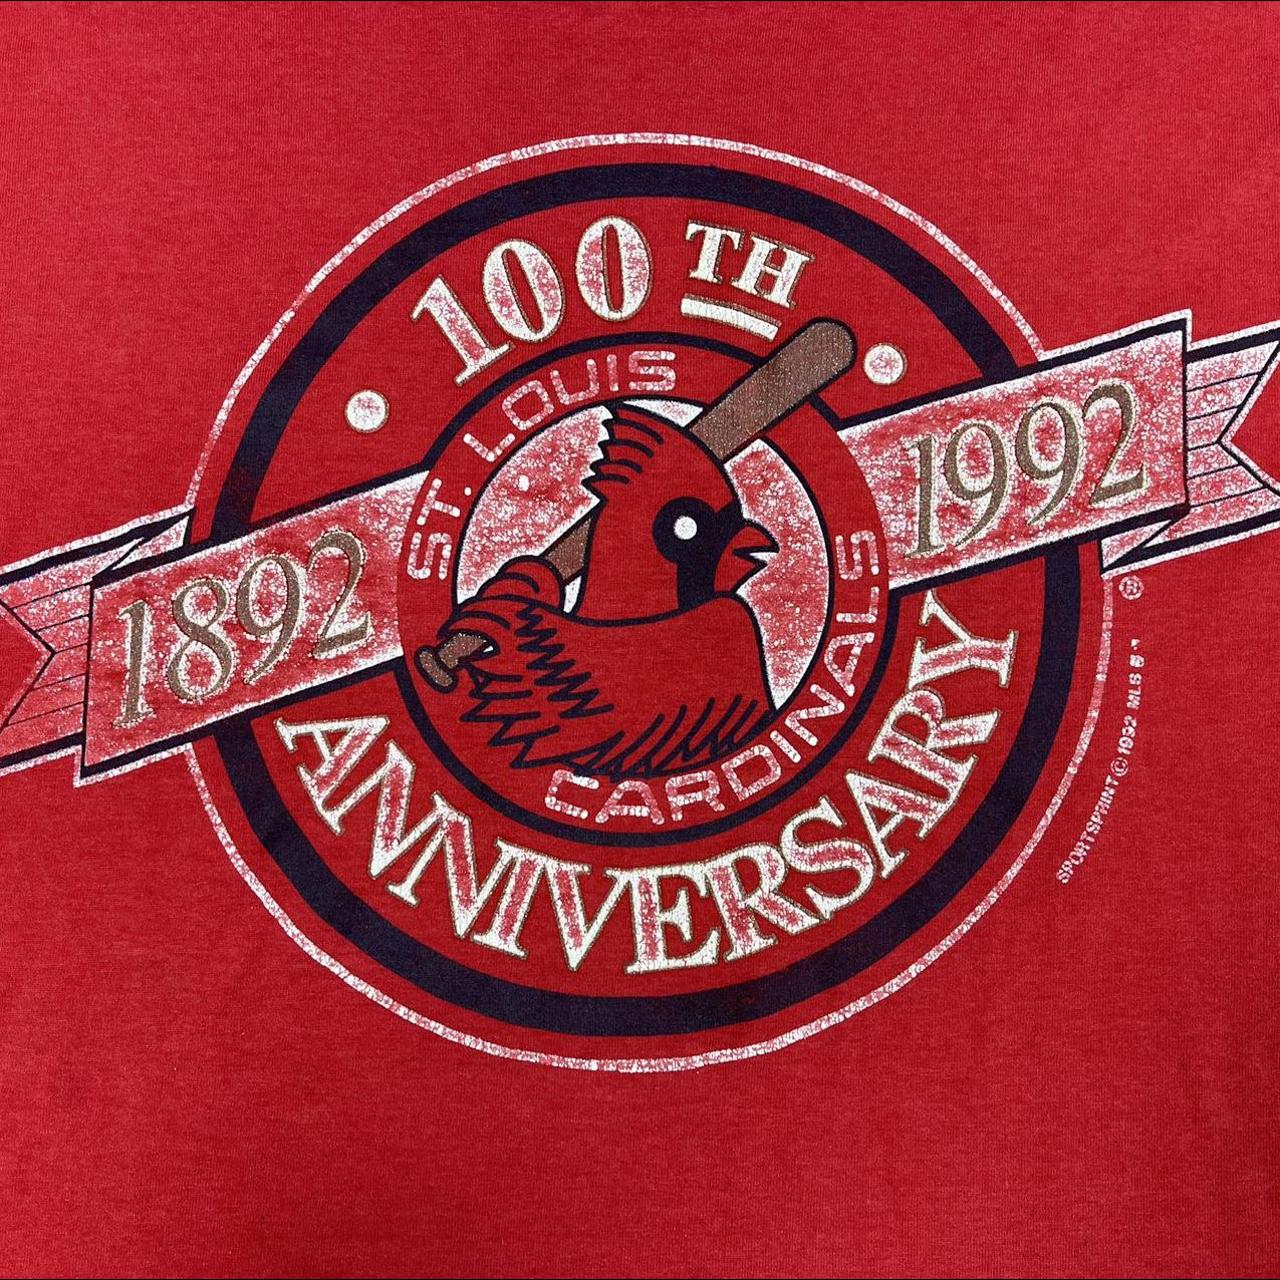 Vintage 1992 St Louis Cardinals 100th Anniversary T-shirt Made in USA